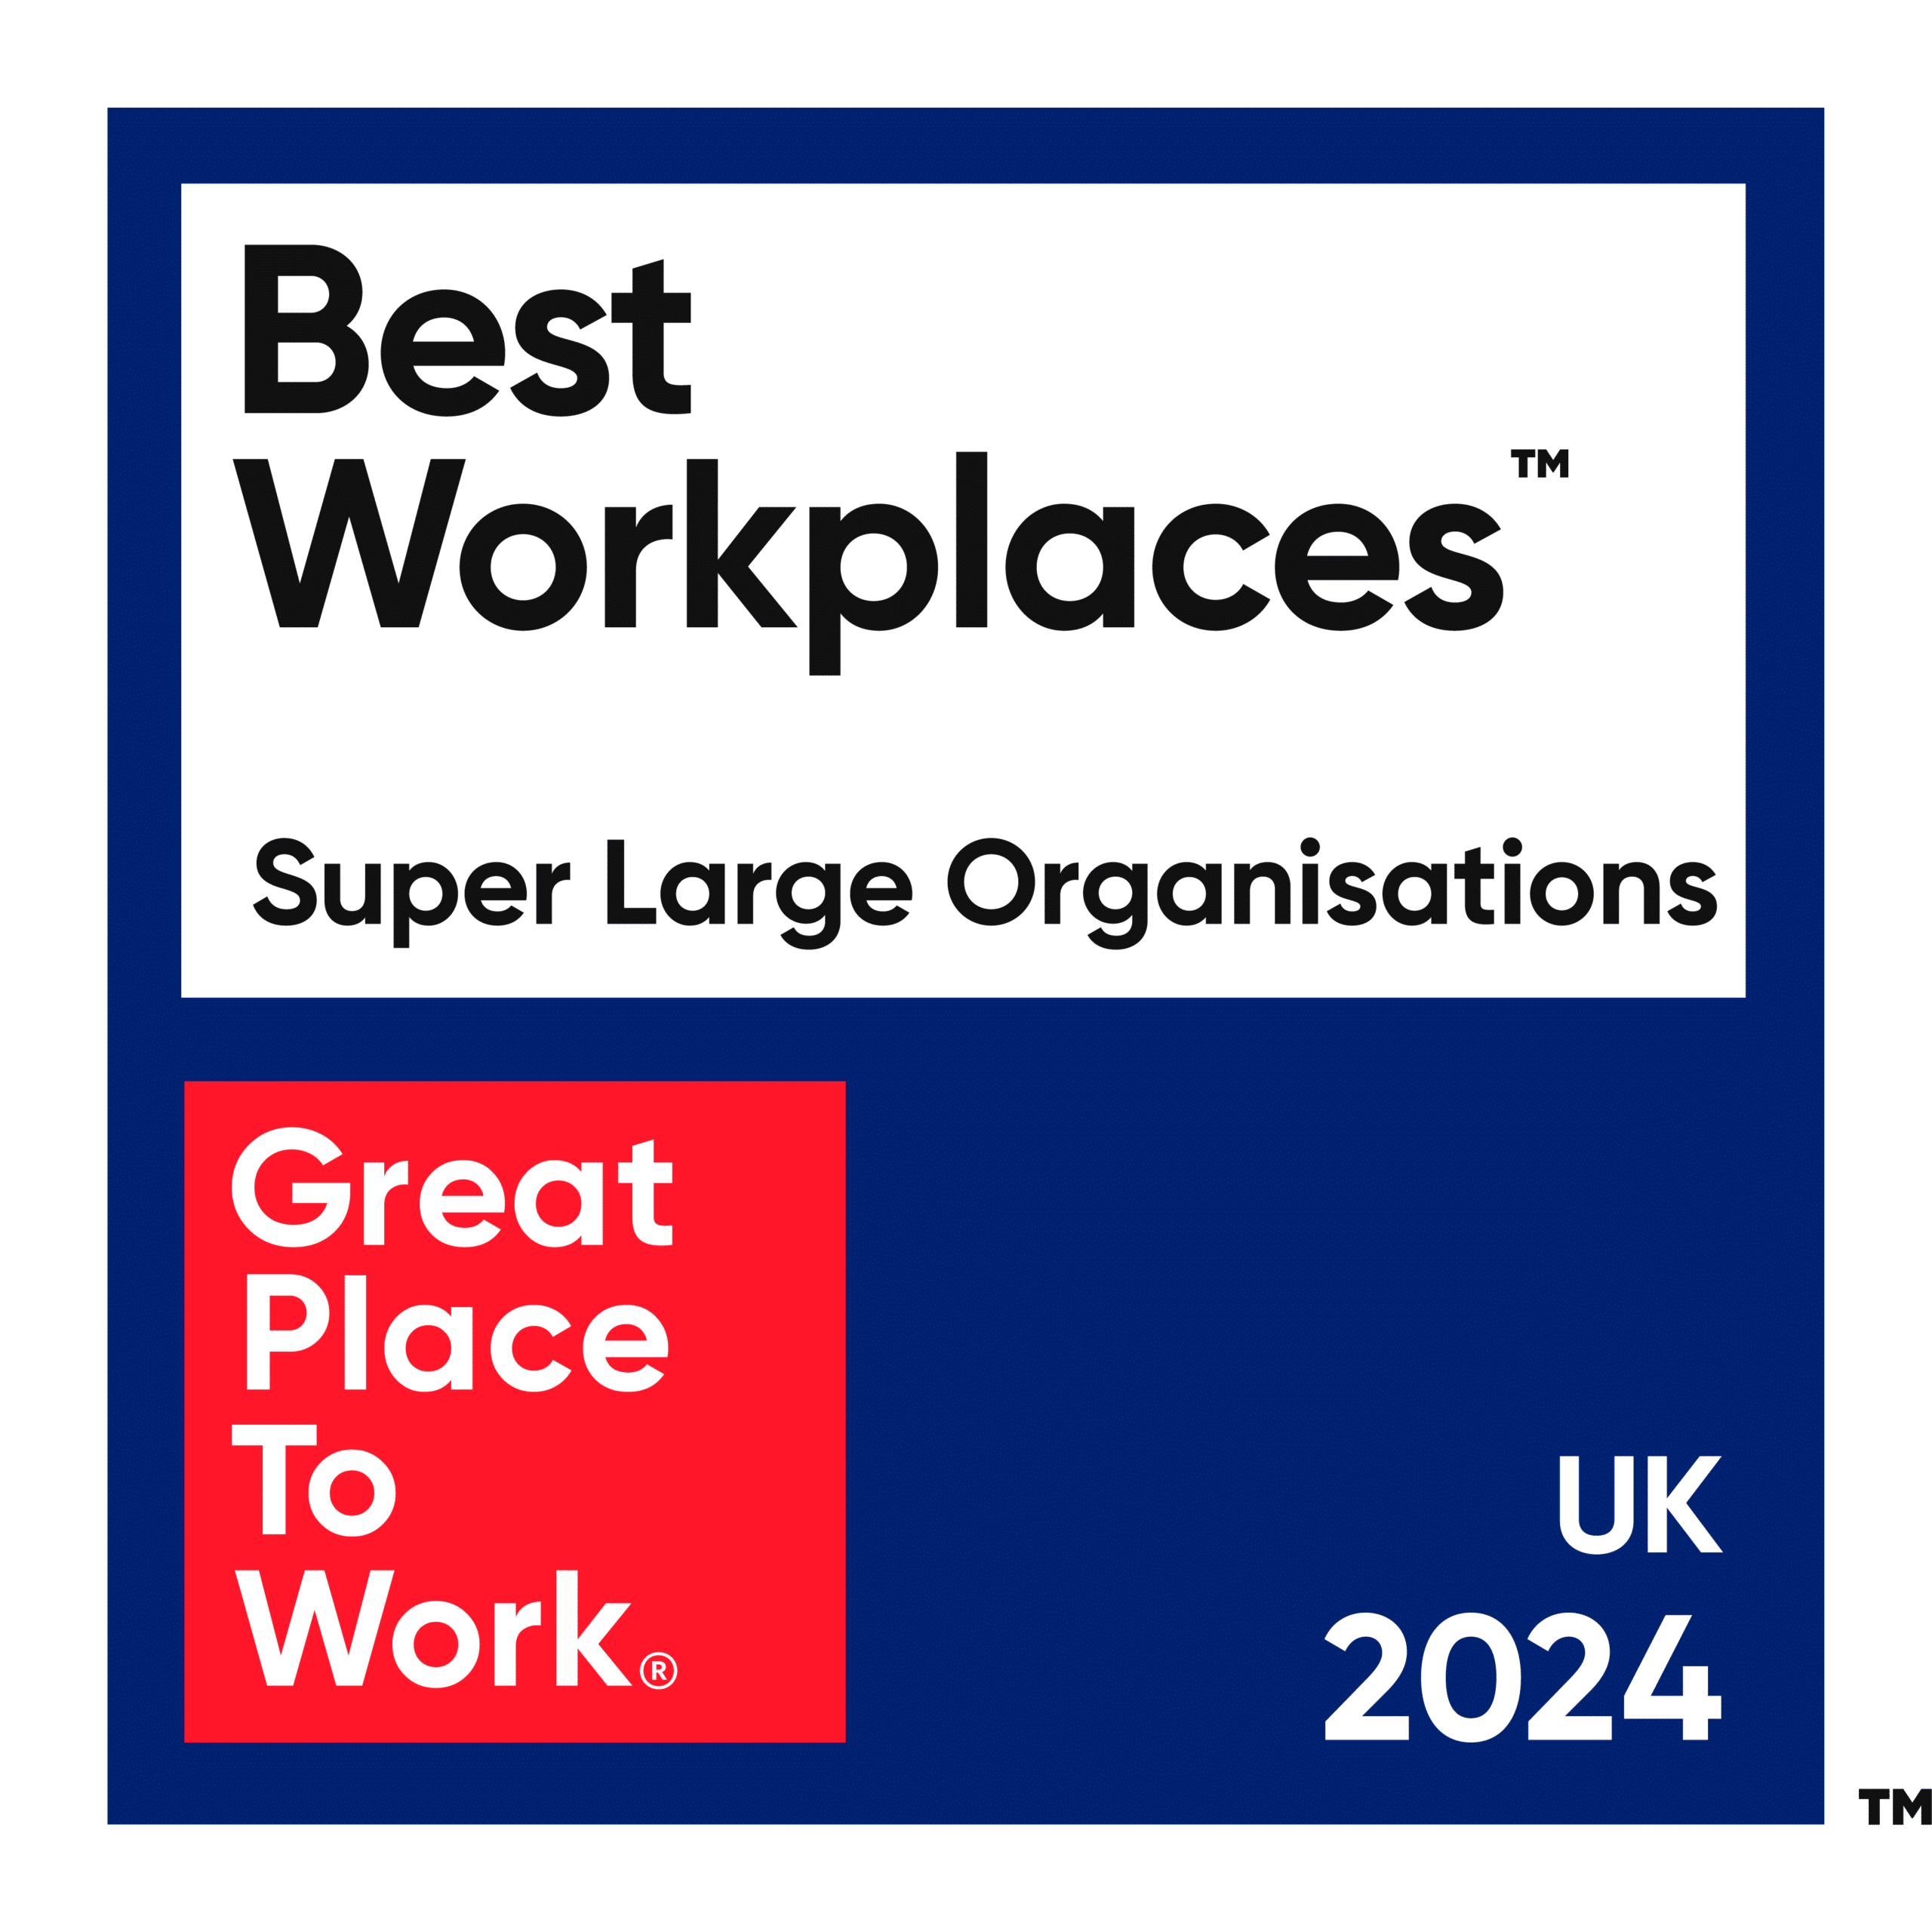 Best Workplaces Super Large Organisations. Great Place to Work UK 2024 logo.